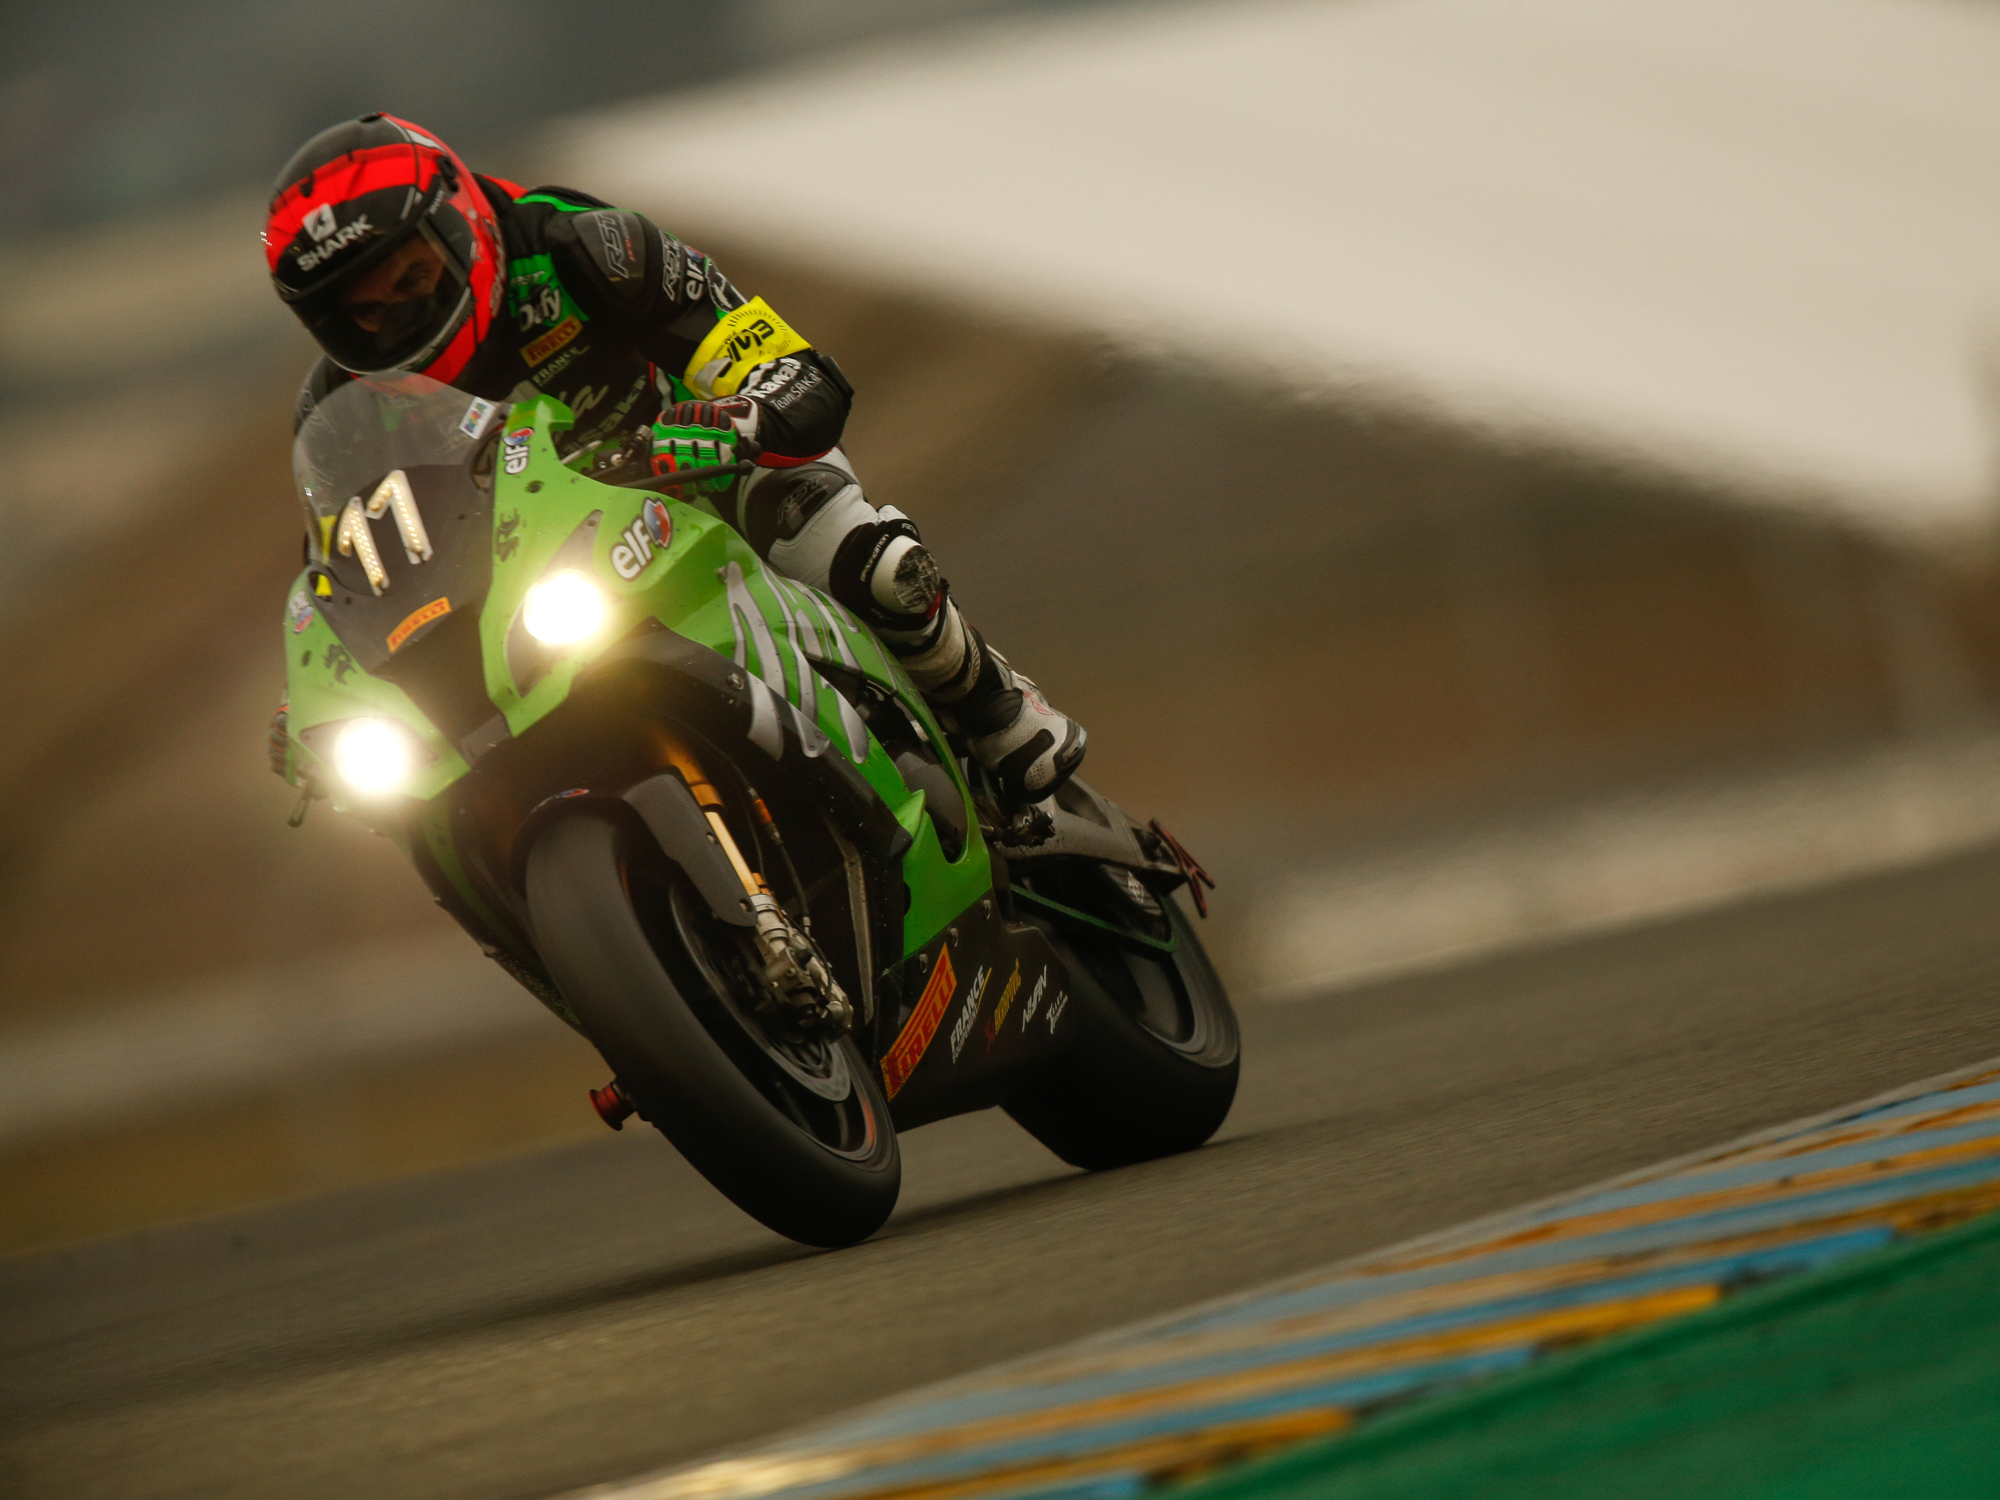 Forstyrre Labe Burger Kawasaki SRC Makes a Clean Sweep at 24 Hour of Le Mans | Cycle World